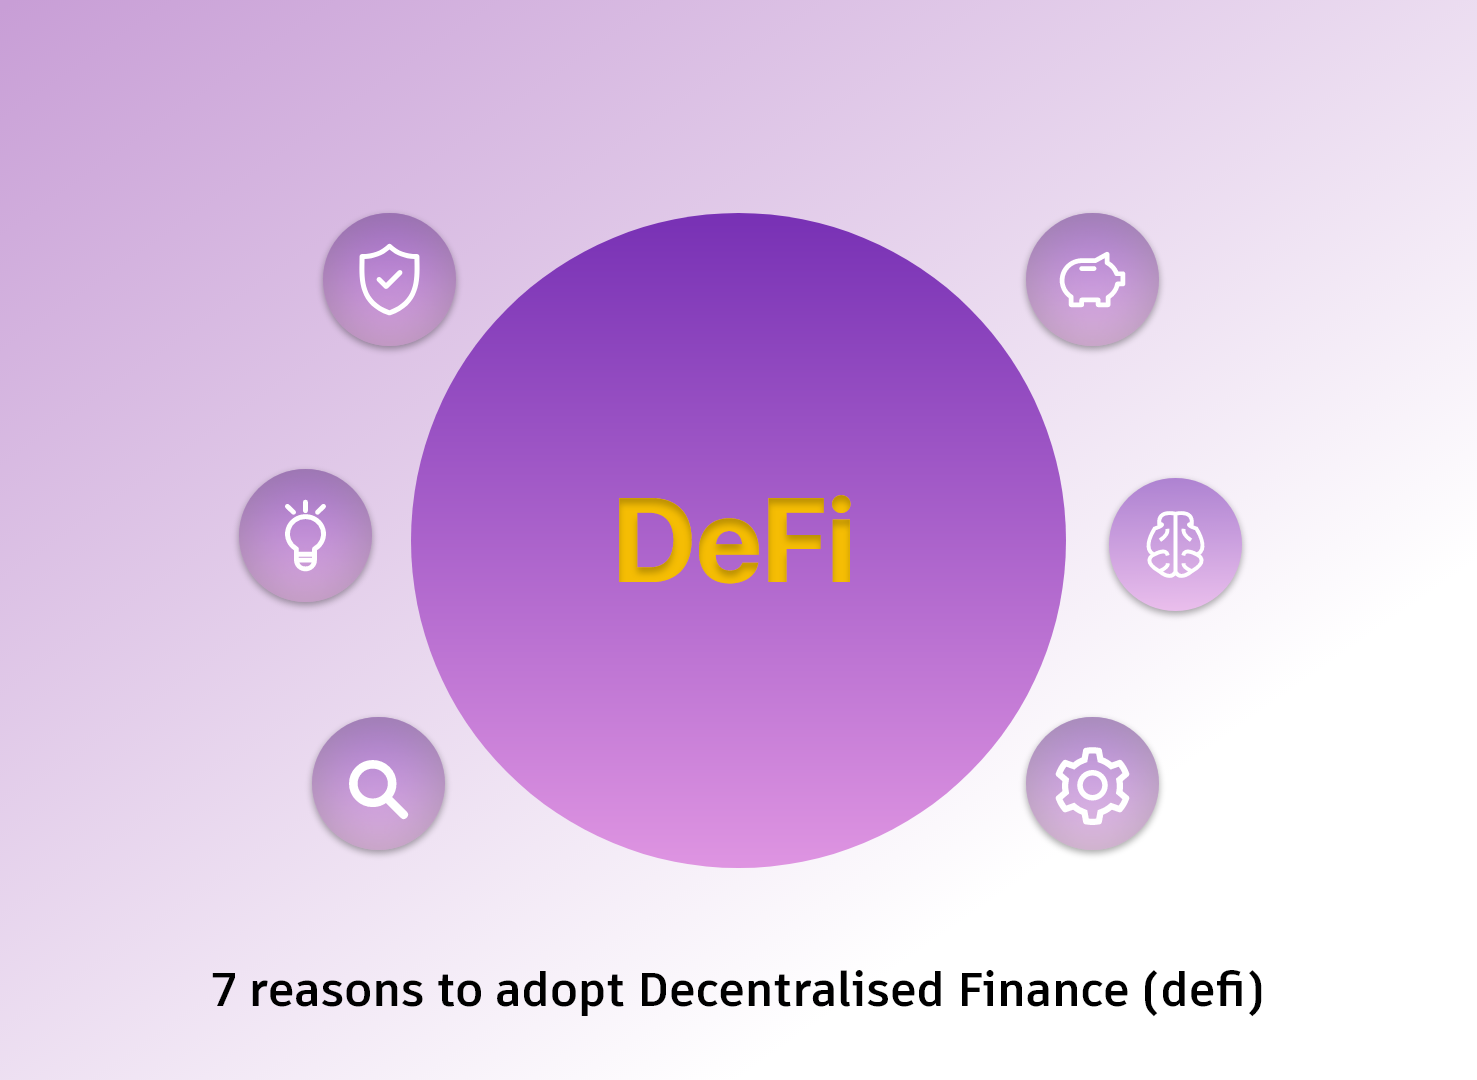 7 Reasons to Adopt Decentralized Finance (DeFi)